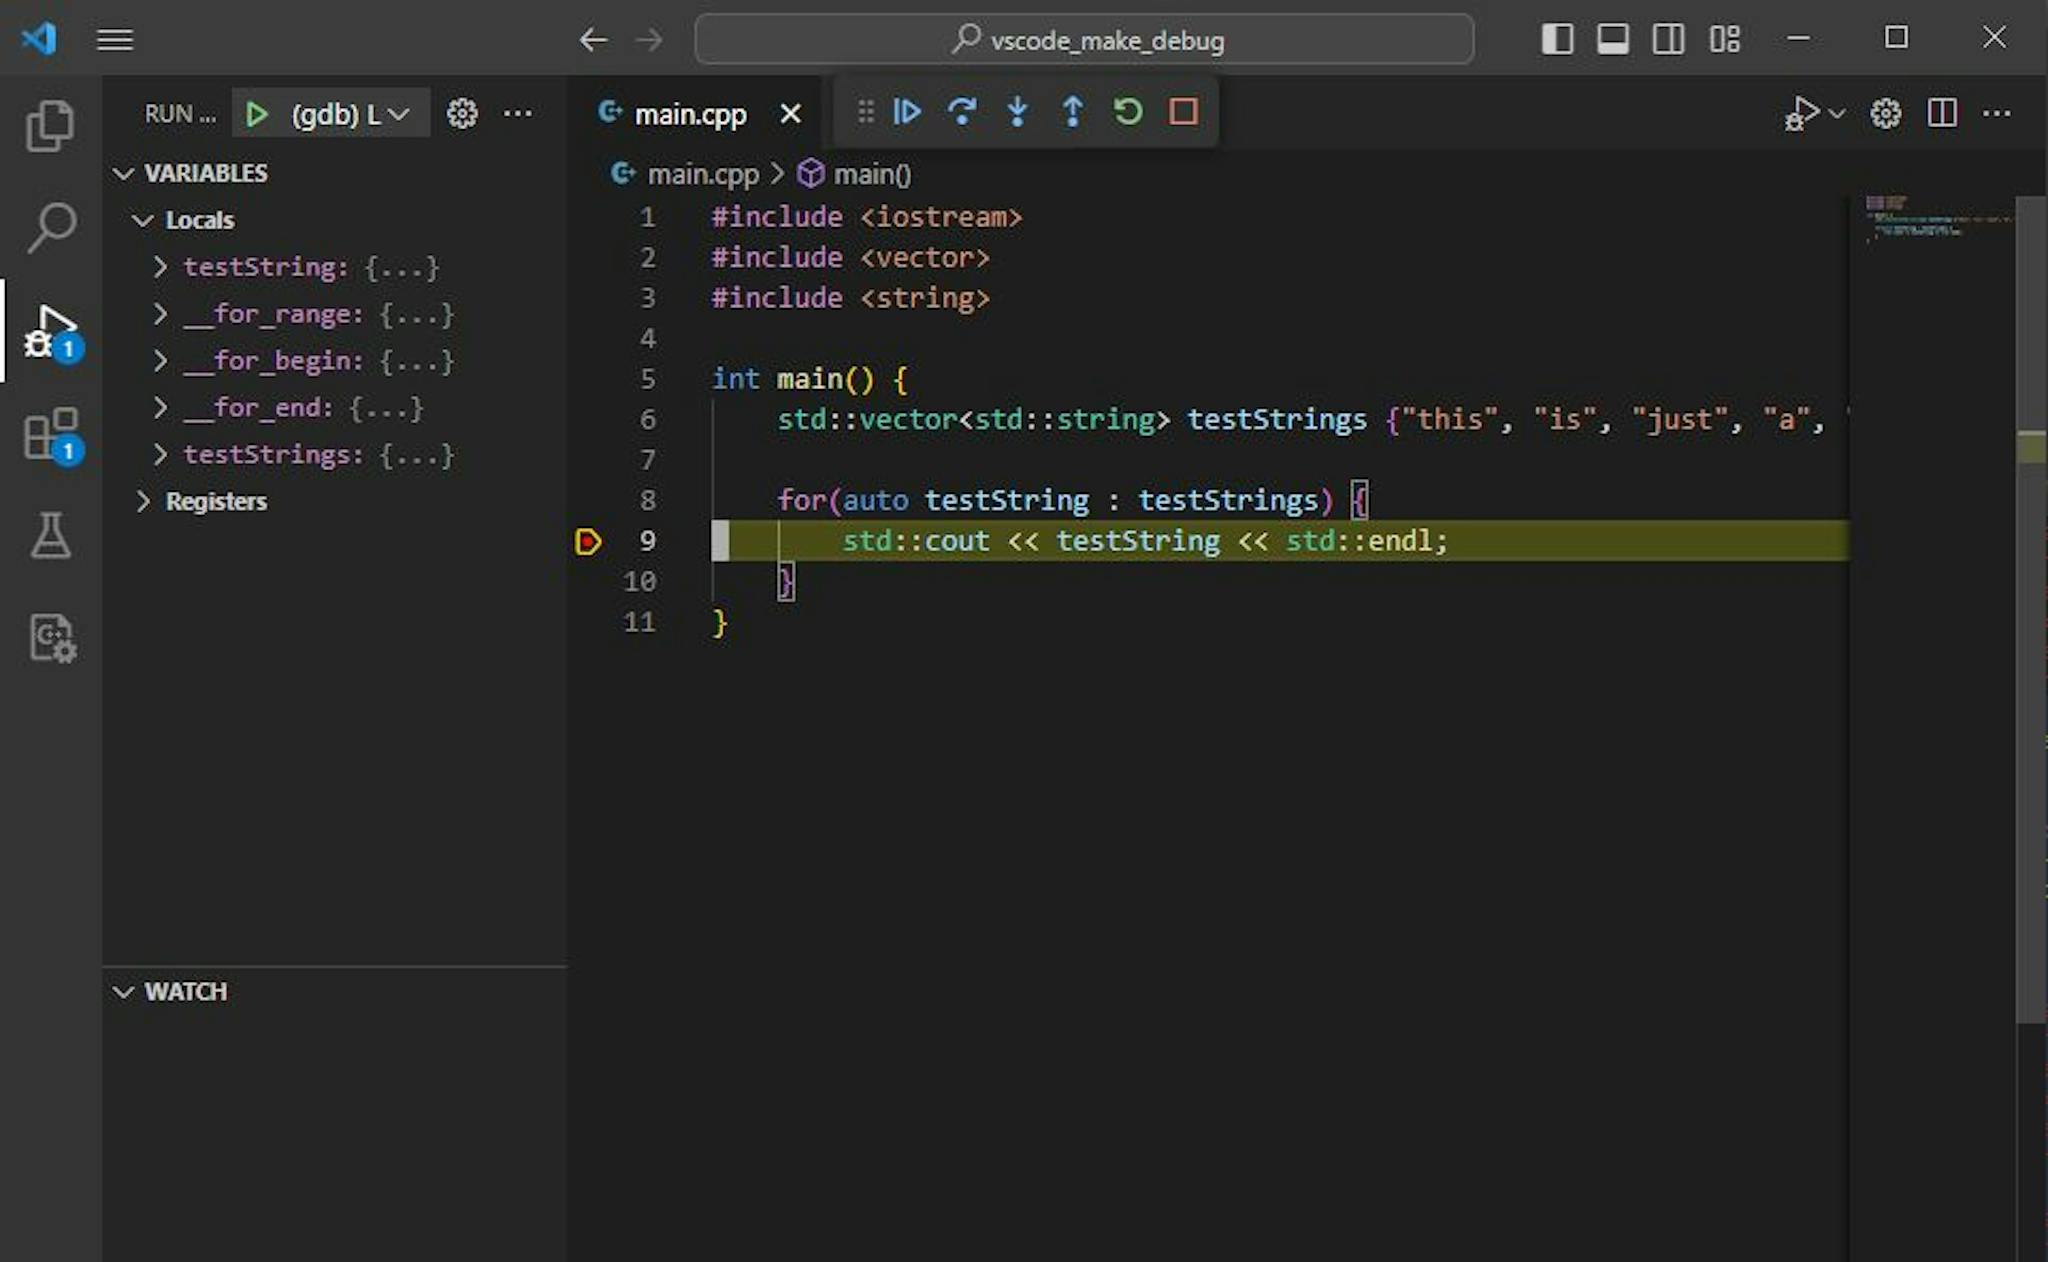 featured image - How to Set up C++ Debugging in VSCode Using a Makefile